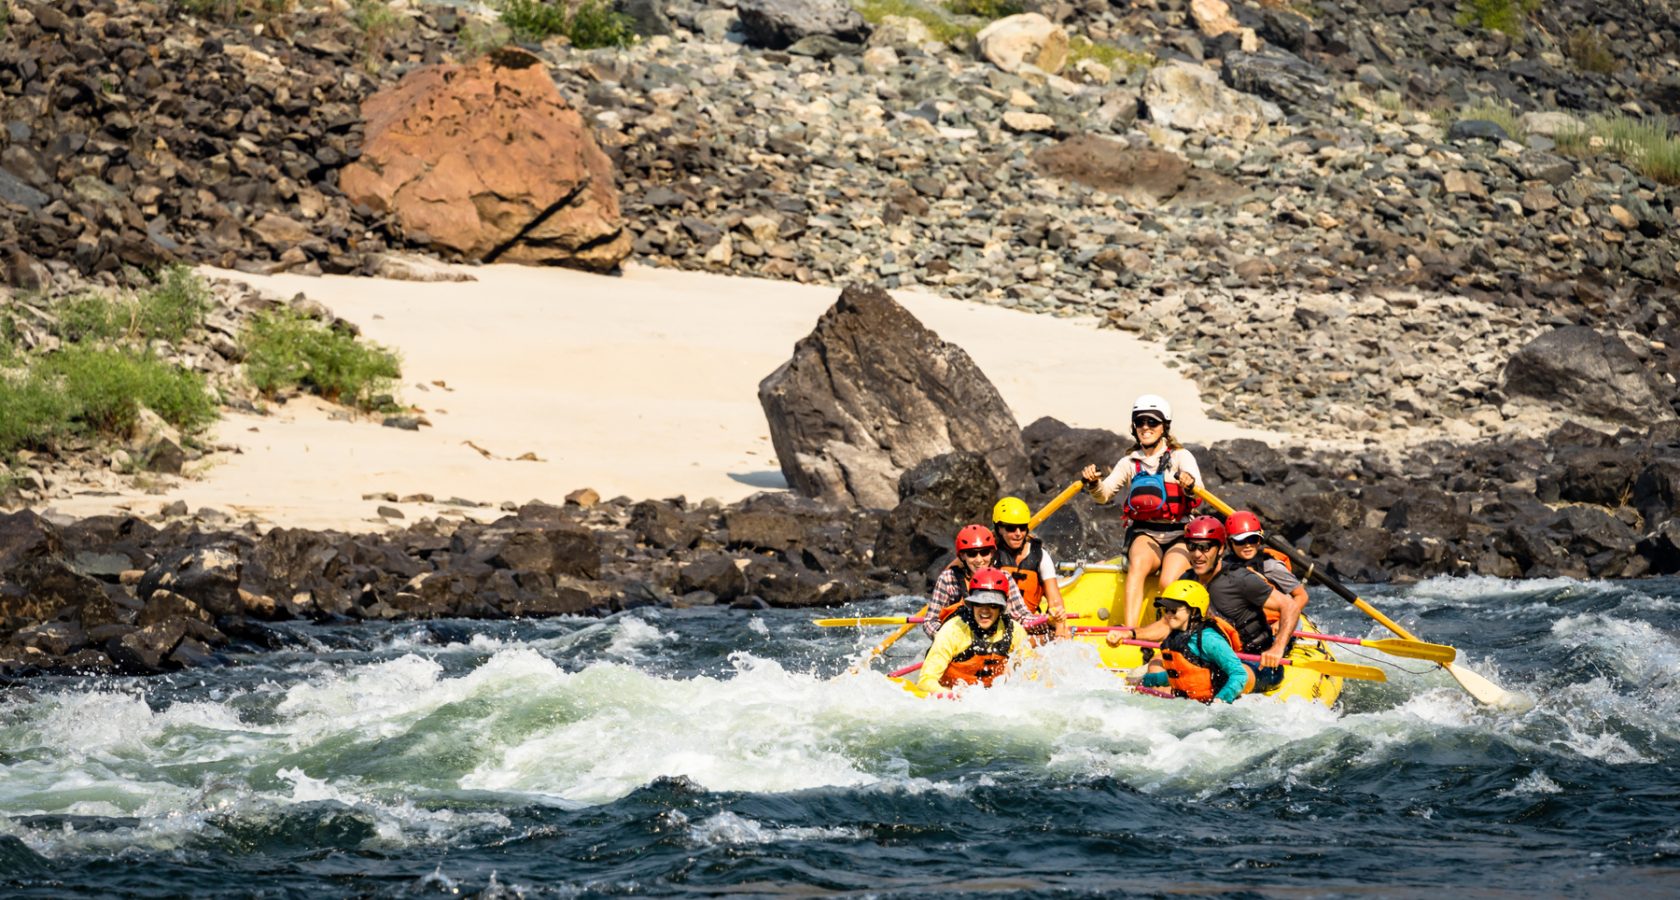 An OARS raft goes through a rapid on the Lower Salmon River